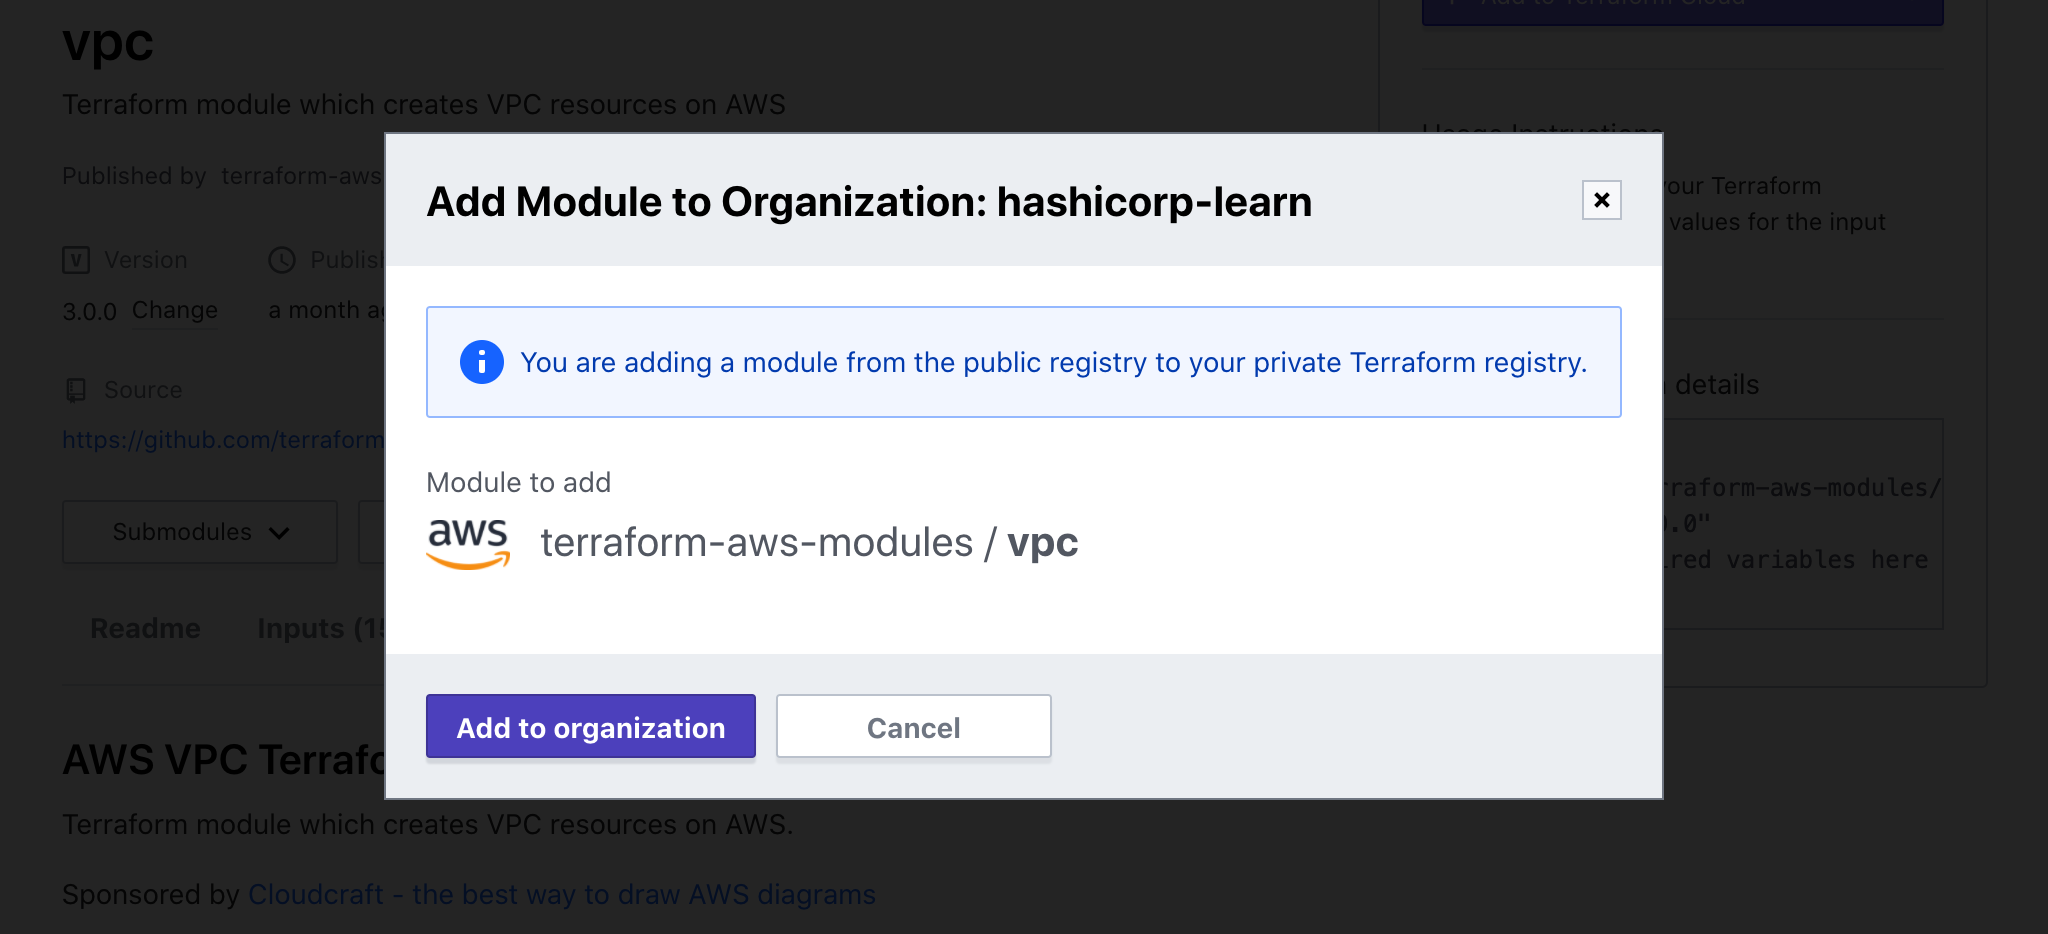 Confirm add VPC module to your organization's private registry